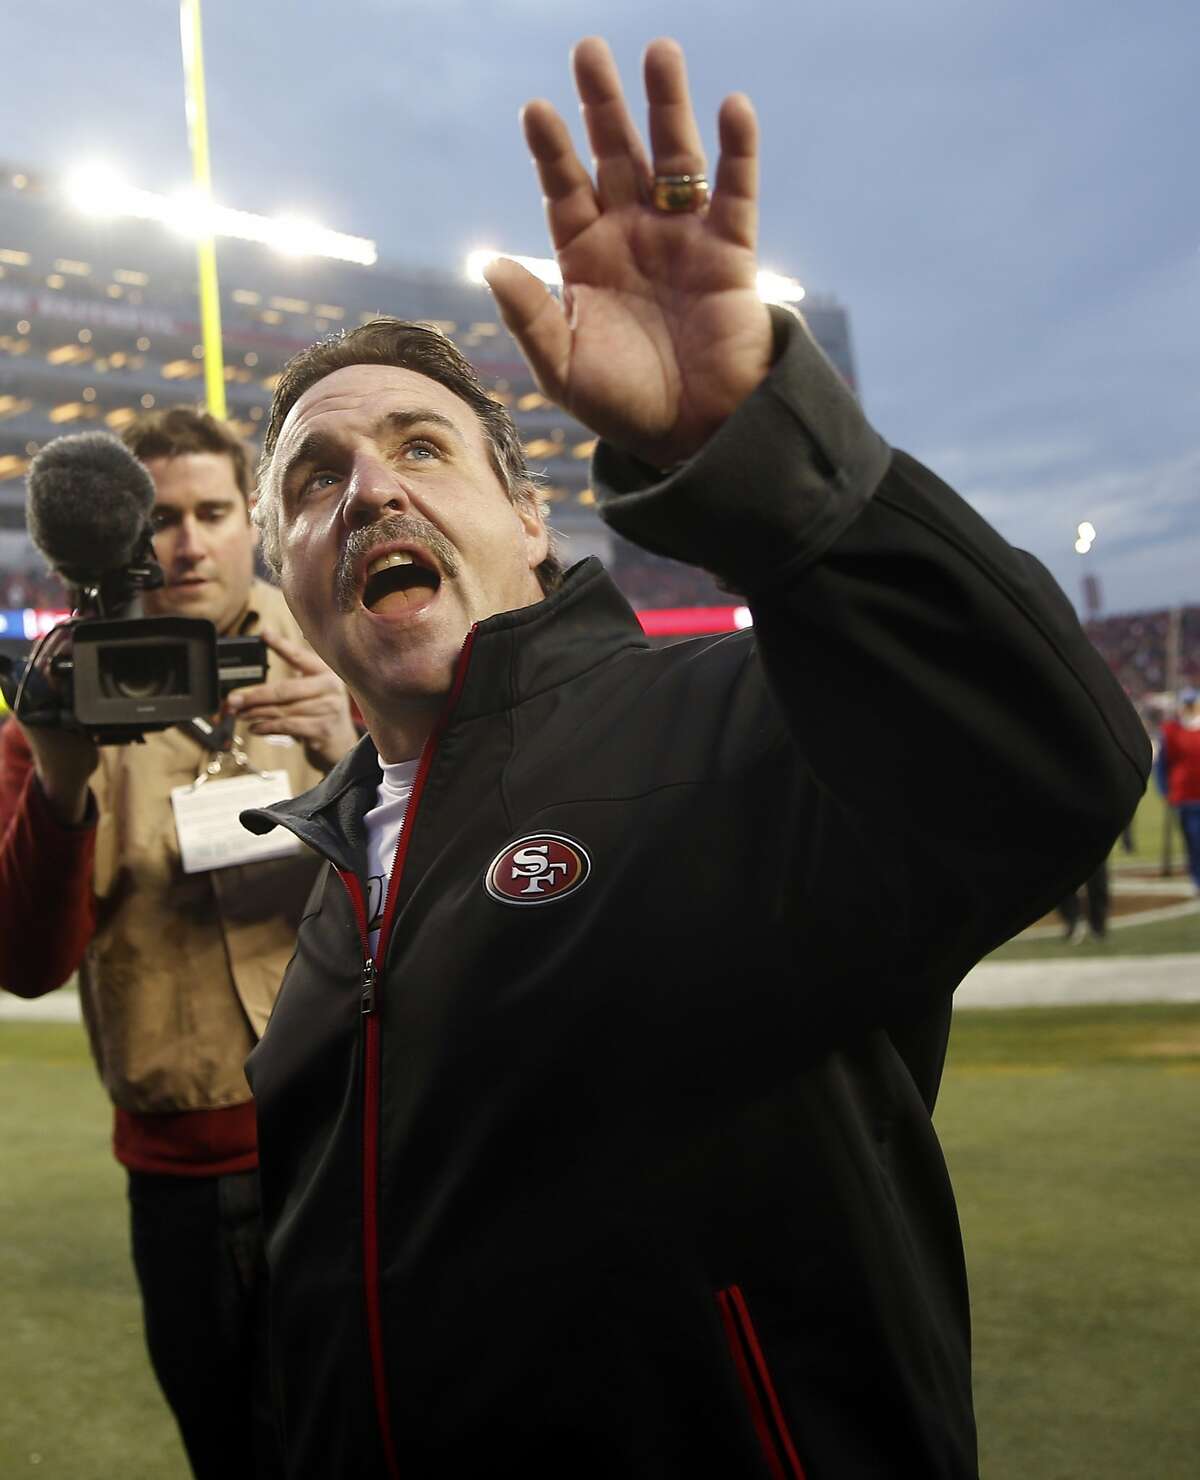 San Francisco 49ers' head coach Jim Tomsula waves to the crowd after Niners' 19-16 win in overtime over St. Louis Rams in NFL game at Levi's Stadium in Santa Clara, Calif., on Sunday, January 3, 2016.